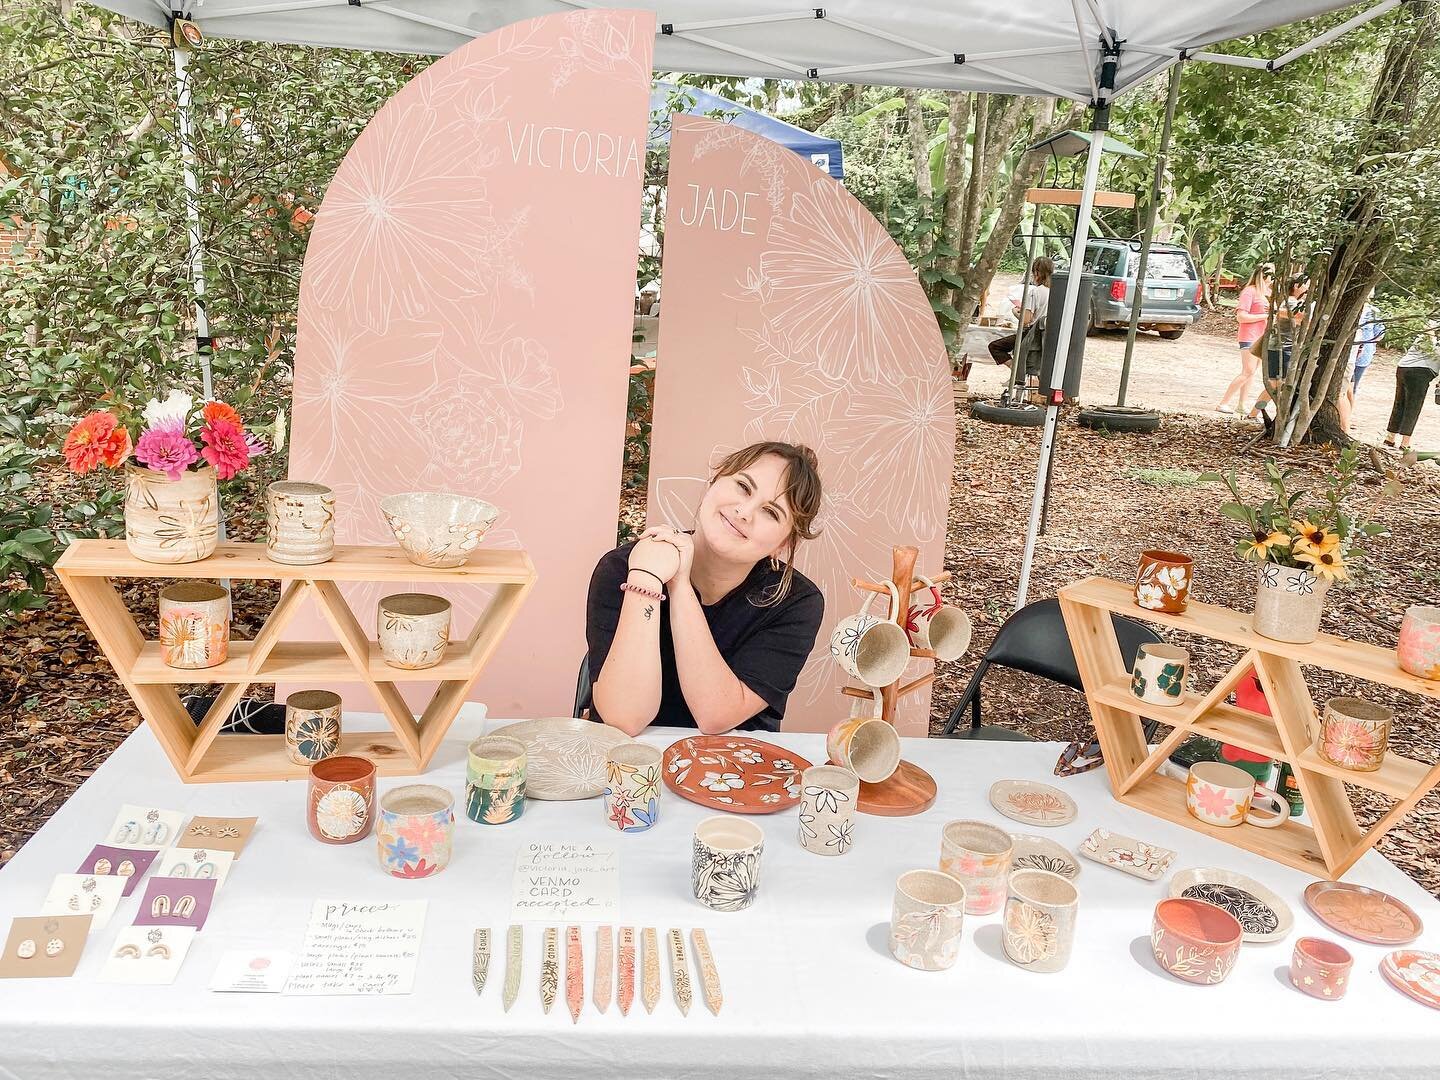 Yesterday was amazing! Thank you to everyone that came out to @tallyclayarts and brought home a new piece ✨I had so much fun meeting new people (and shopping because how can you not with all the talent!!) - this ceramic community is so kind, talented